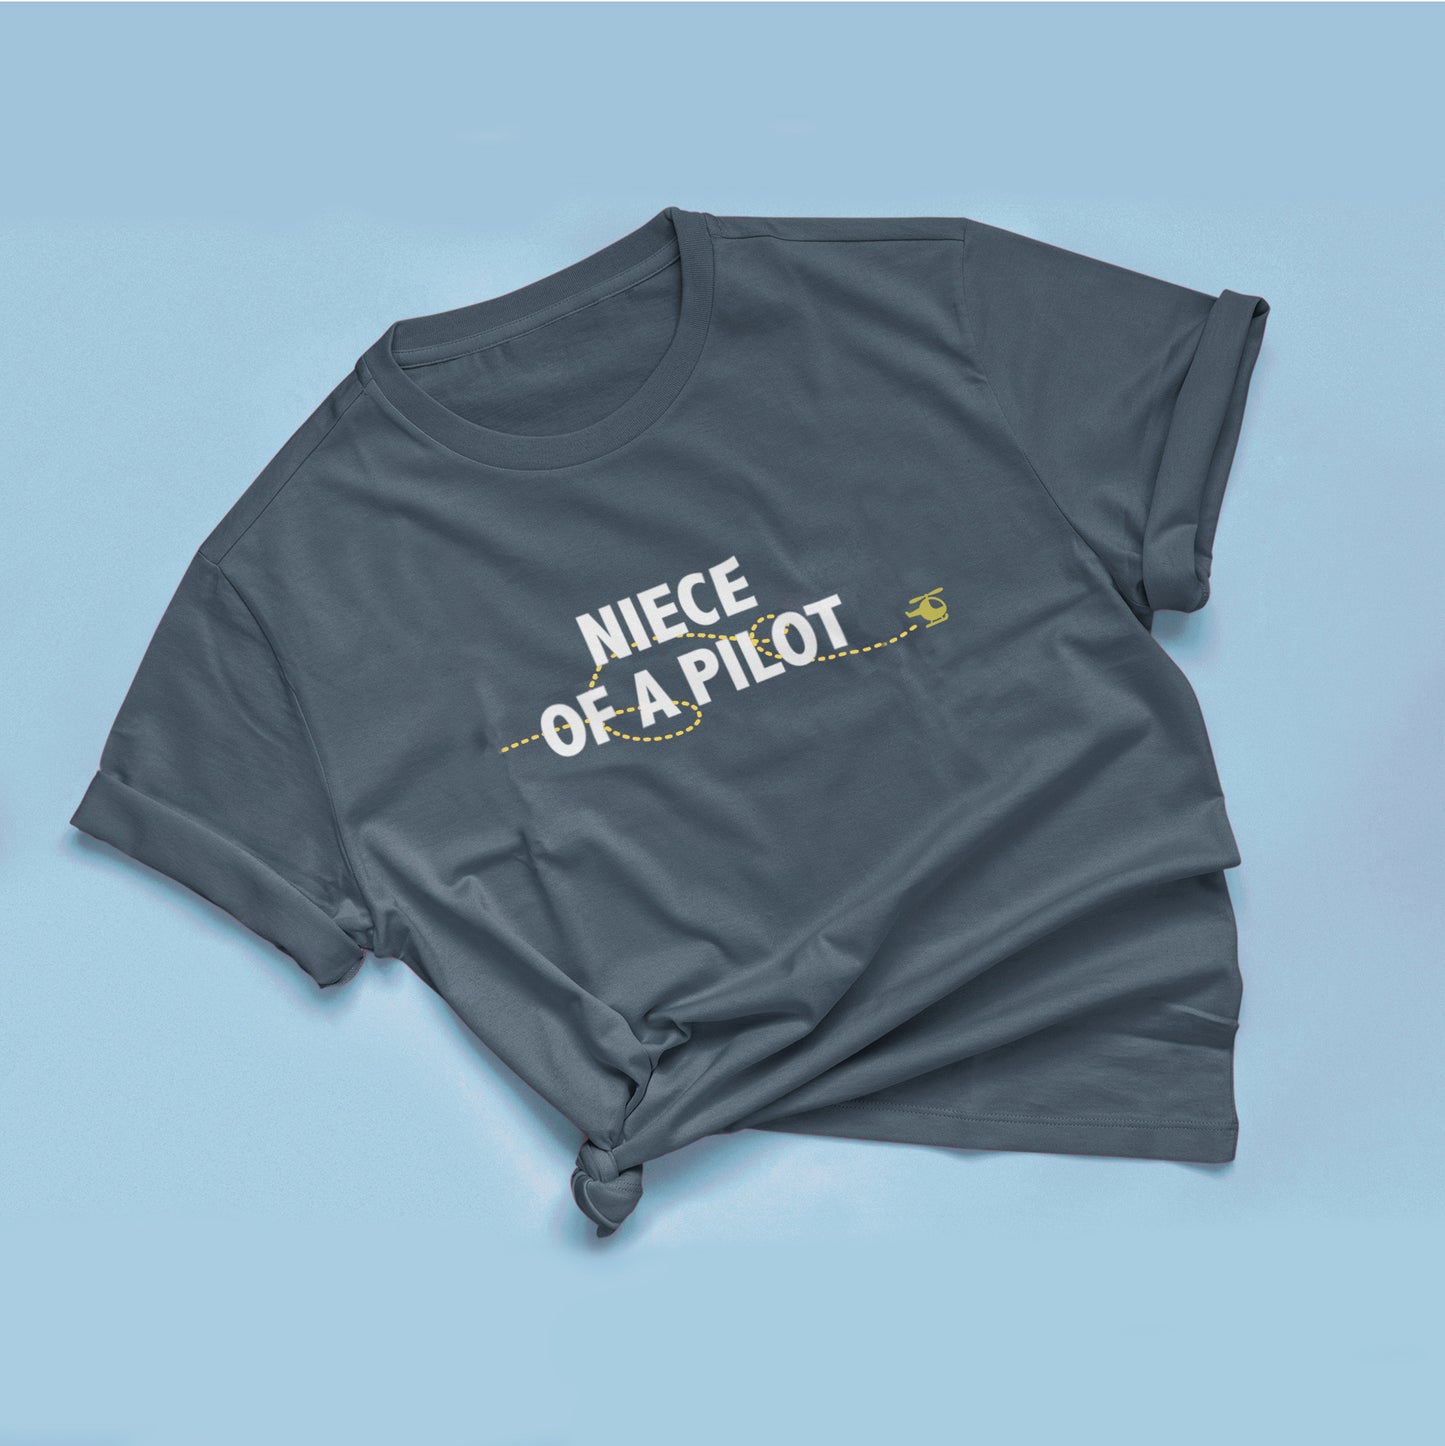 Niece of the/a Pilot - Youth T-shirt